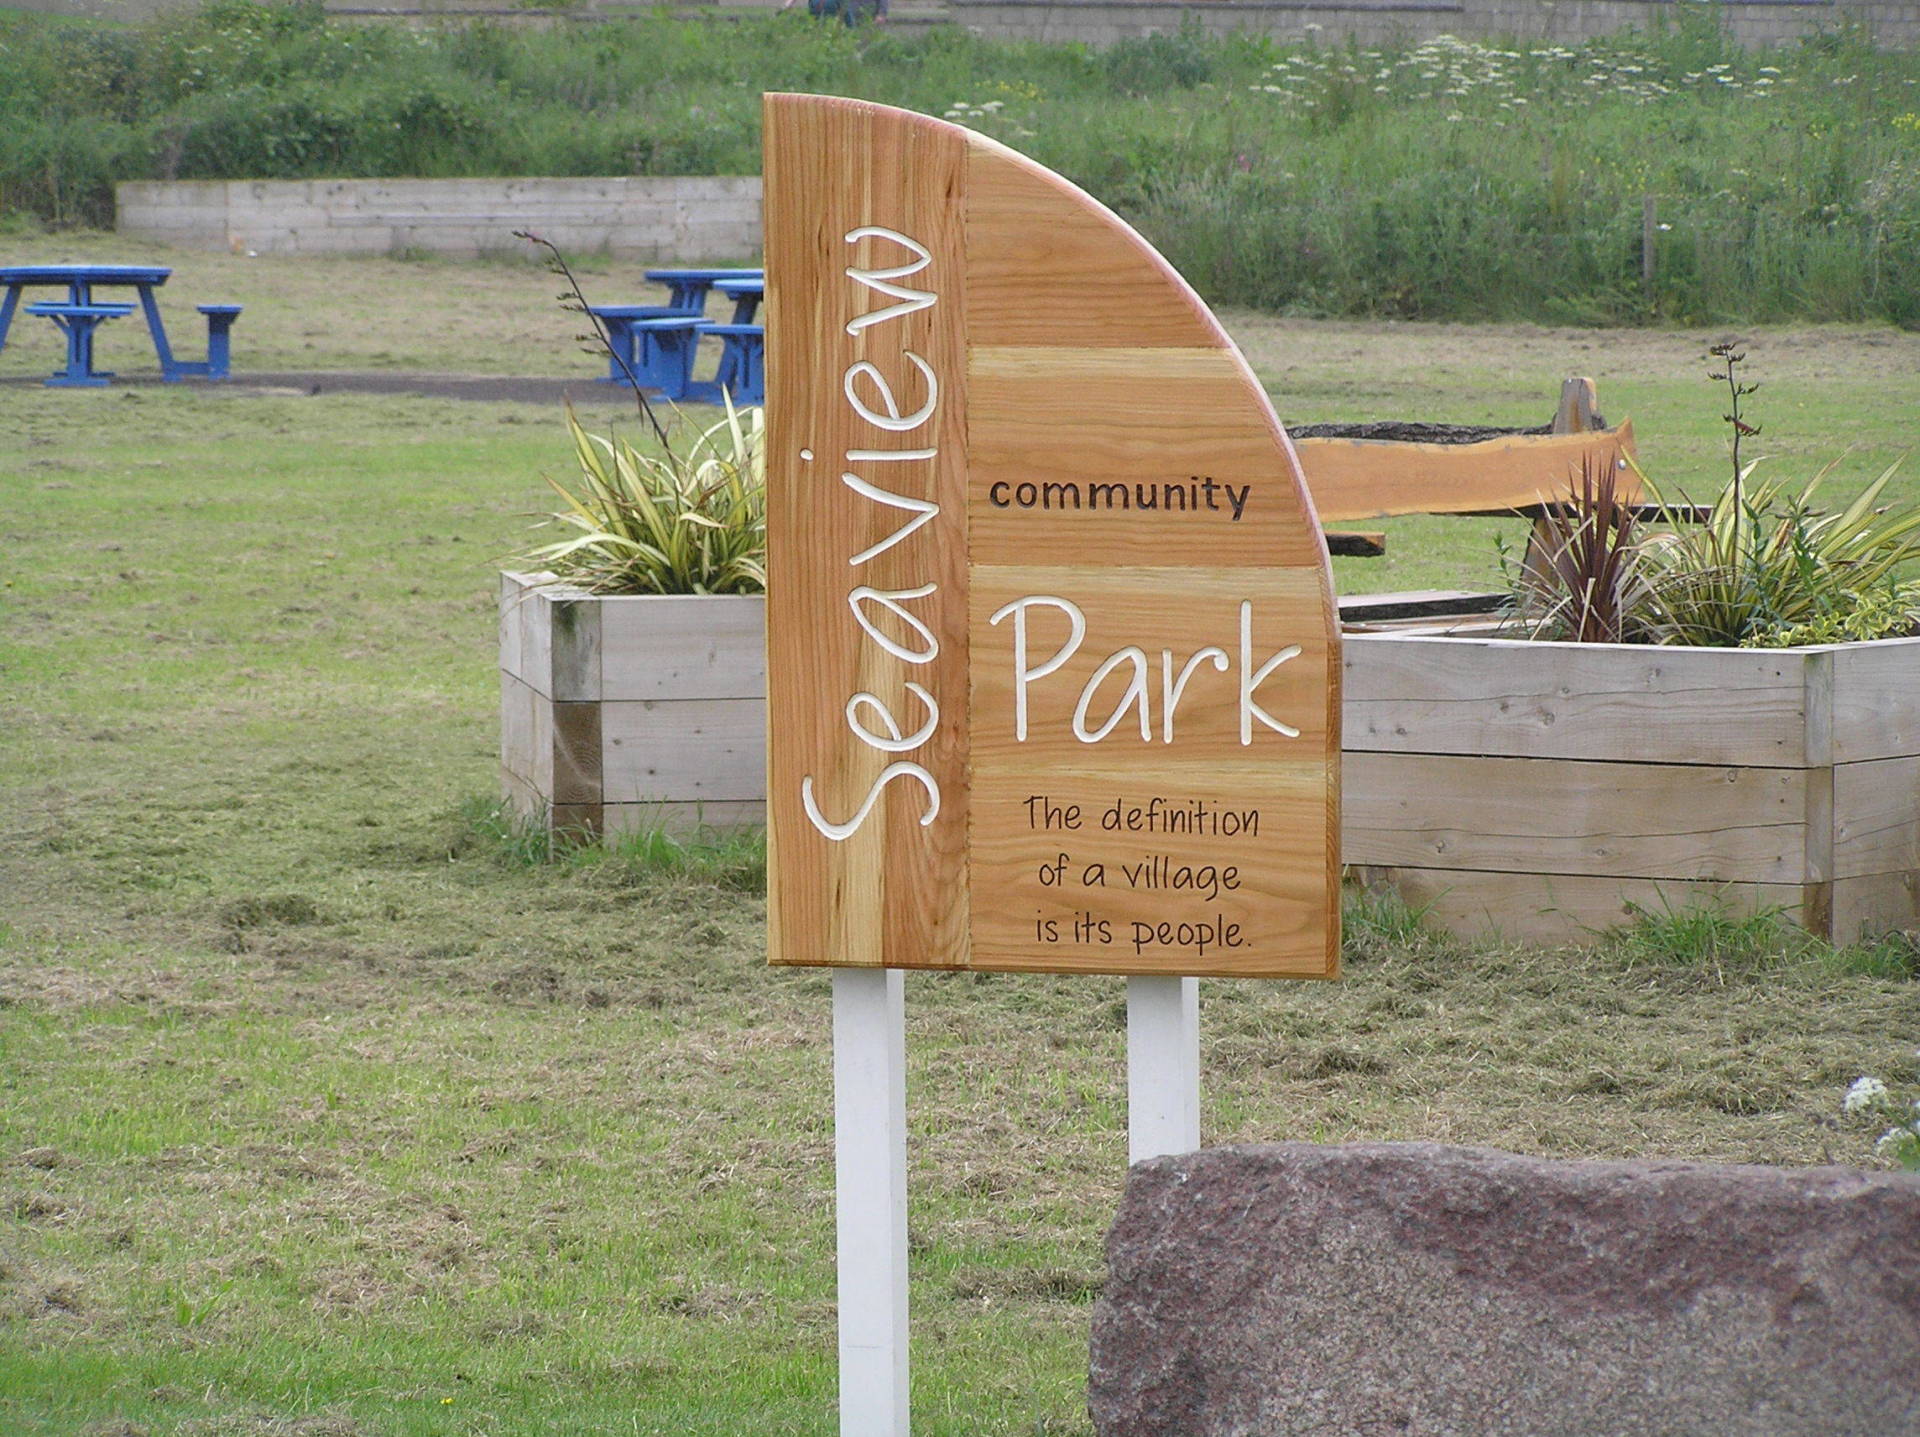 An Eco-friendly handmade community park sign by Ingrained culture.